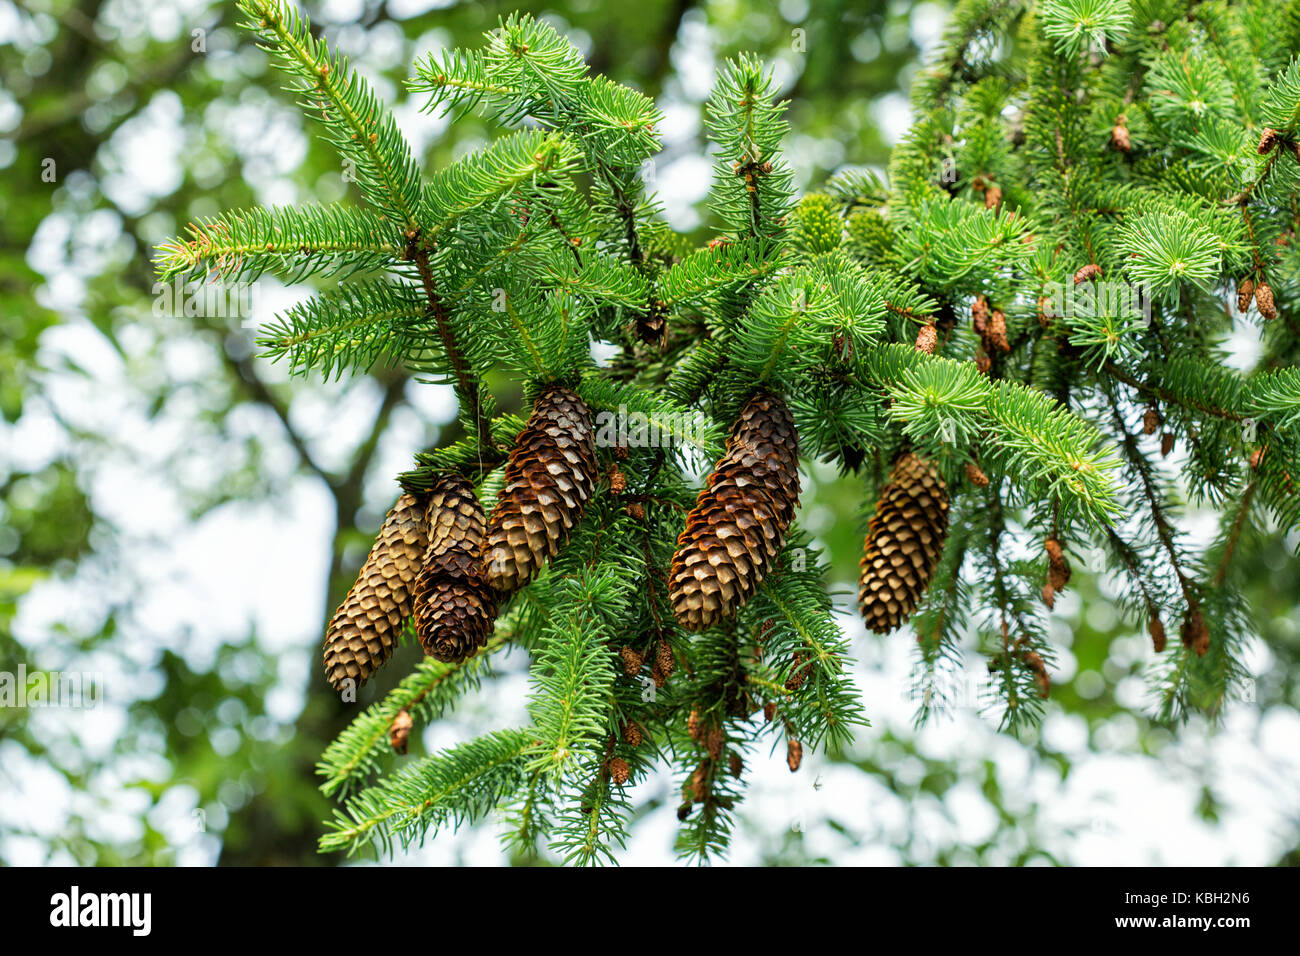 Branch of a tree with large open cones Stock Photo